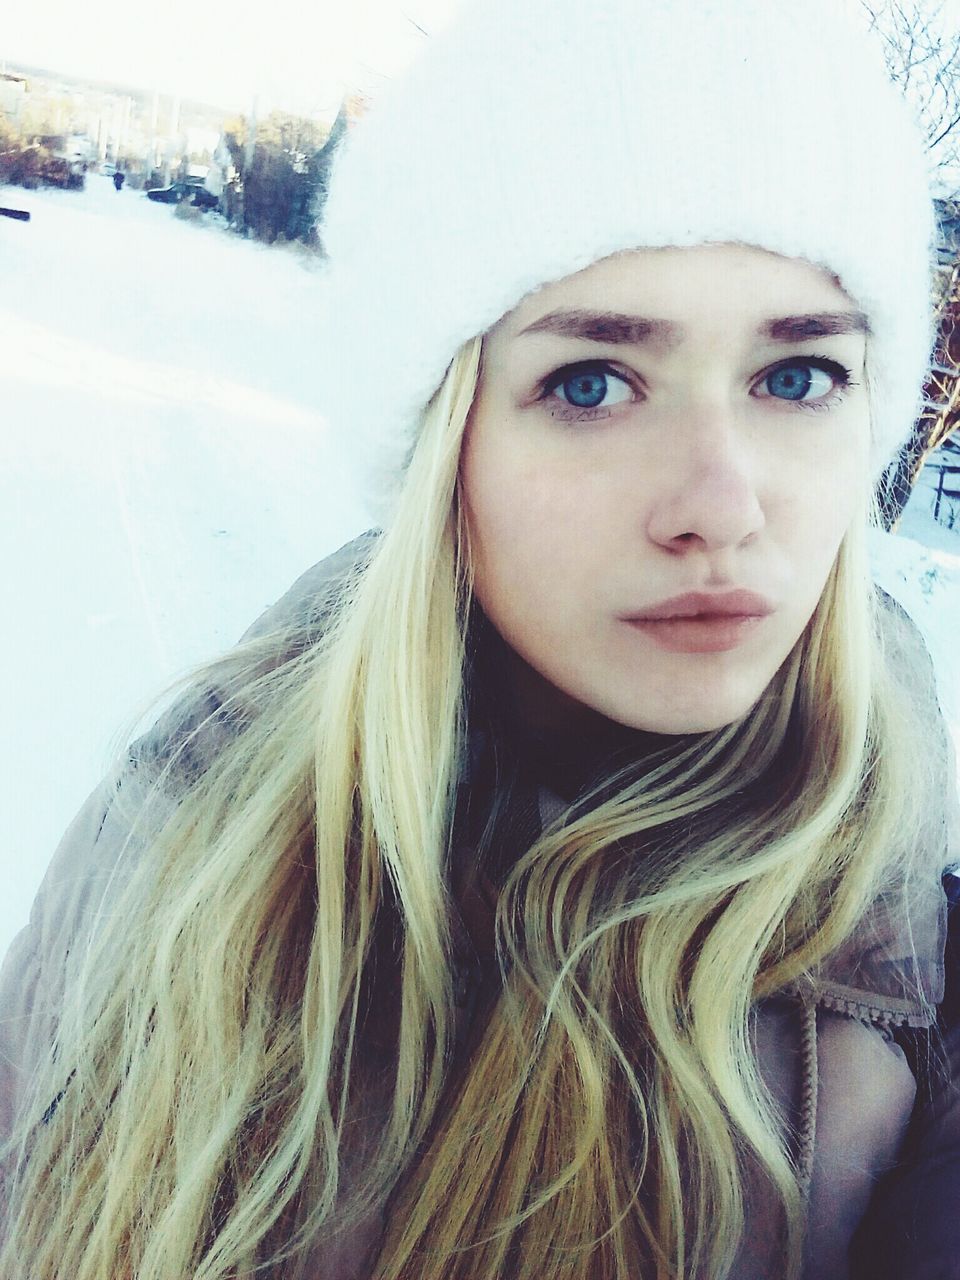 winter, cold temperature, snow, portrait, weather, looking at camera, beautiful woman, long hair, warm clothing, one person, outdoors, day, young adult, young women, nature, real people, blond hair, close-up, people